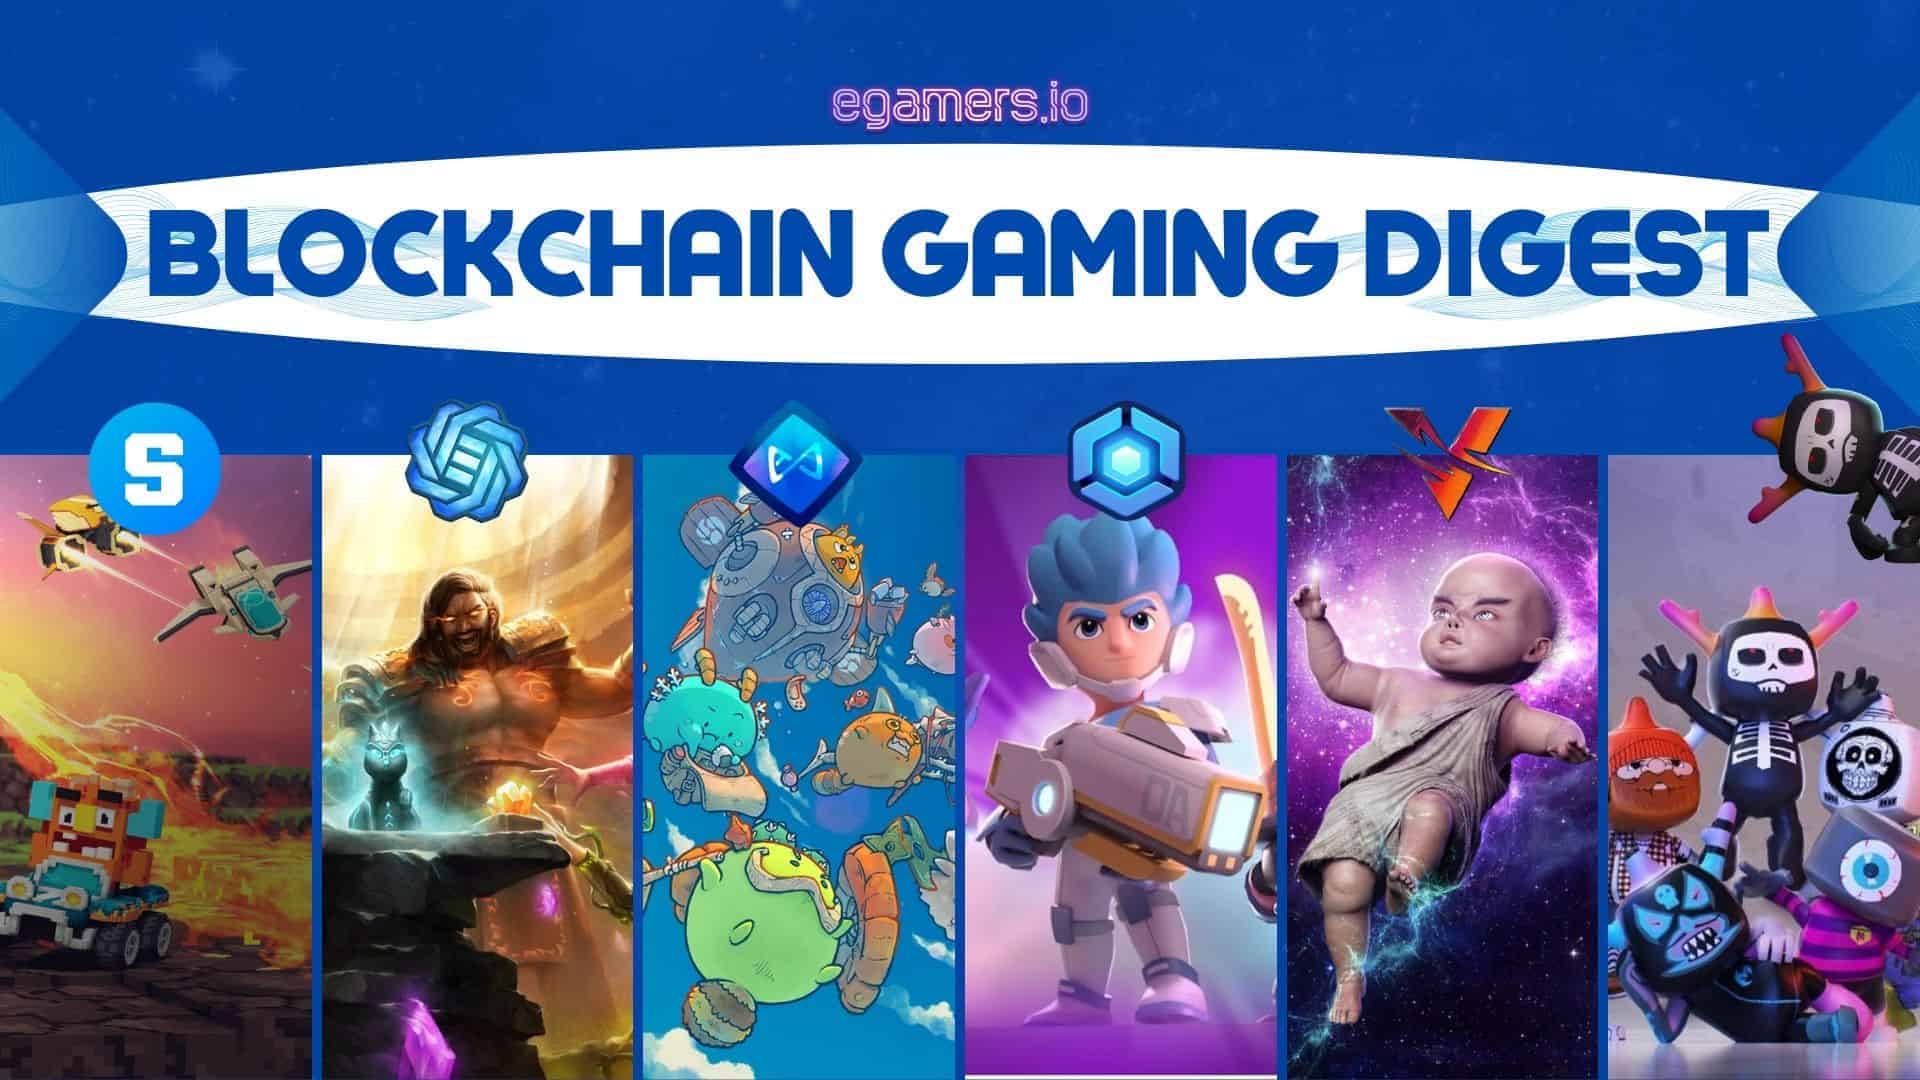 BLOCKCHAIN GAMING DIGEST new It's an exciting day for us at egamers.io as we are packing our stuff to travel in Ukraine for the CGC (Crypto Games Conference) on 10 and 11th of October.